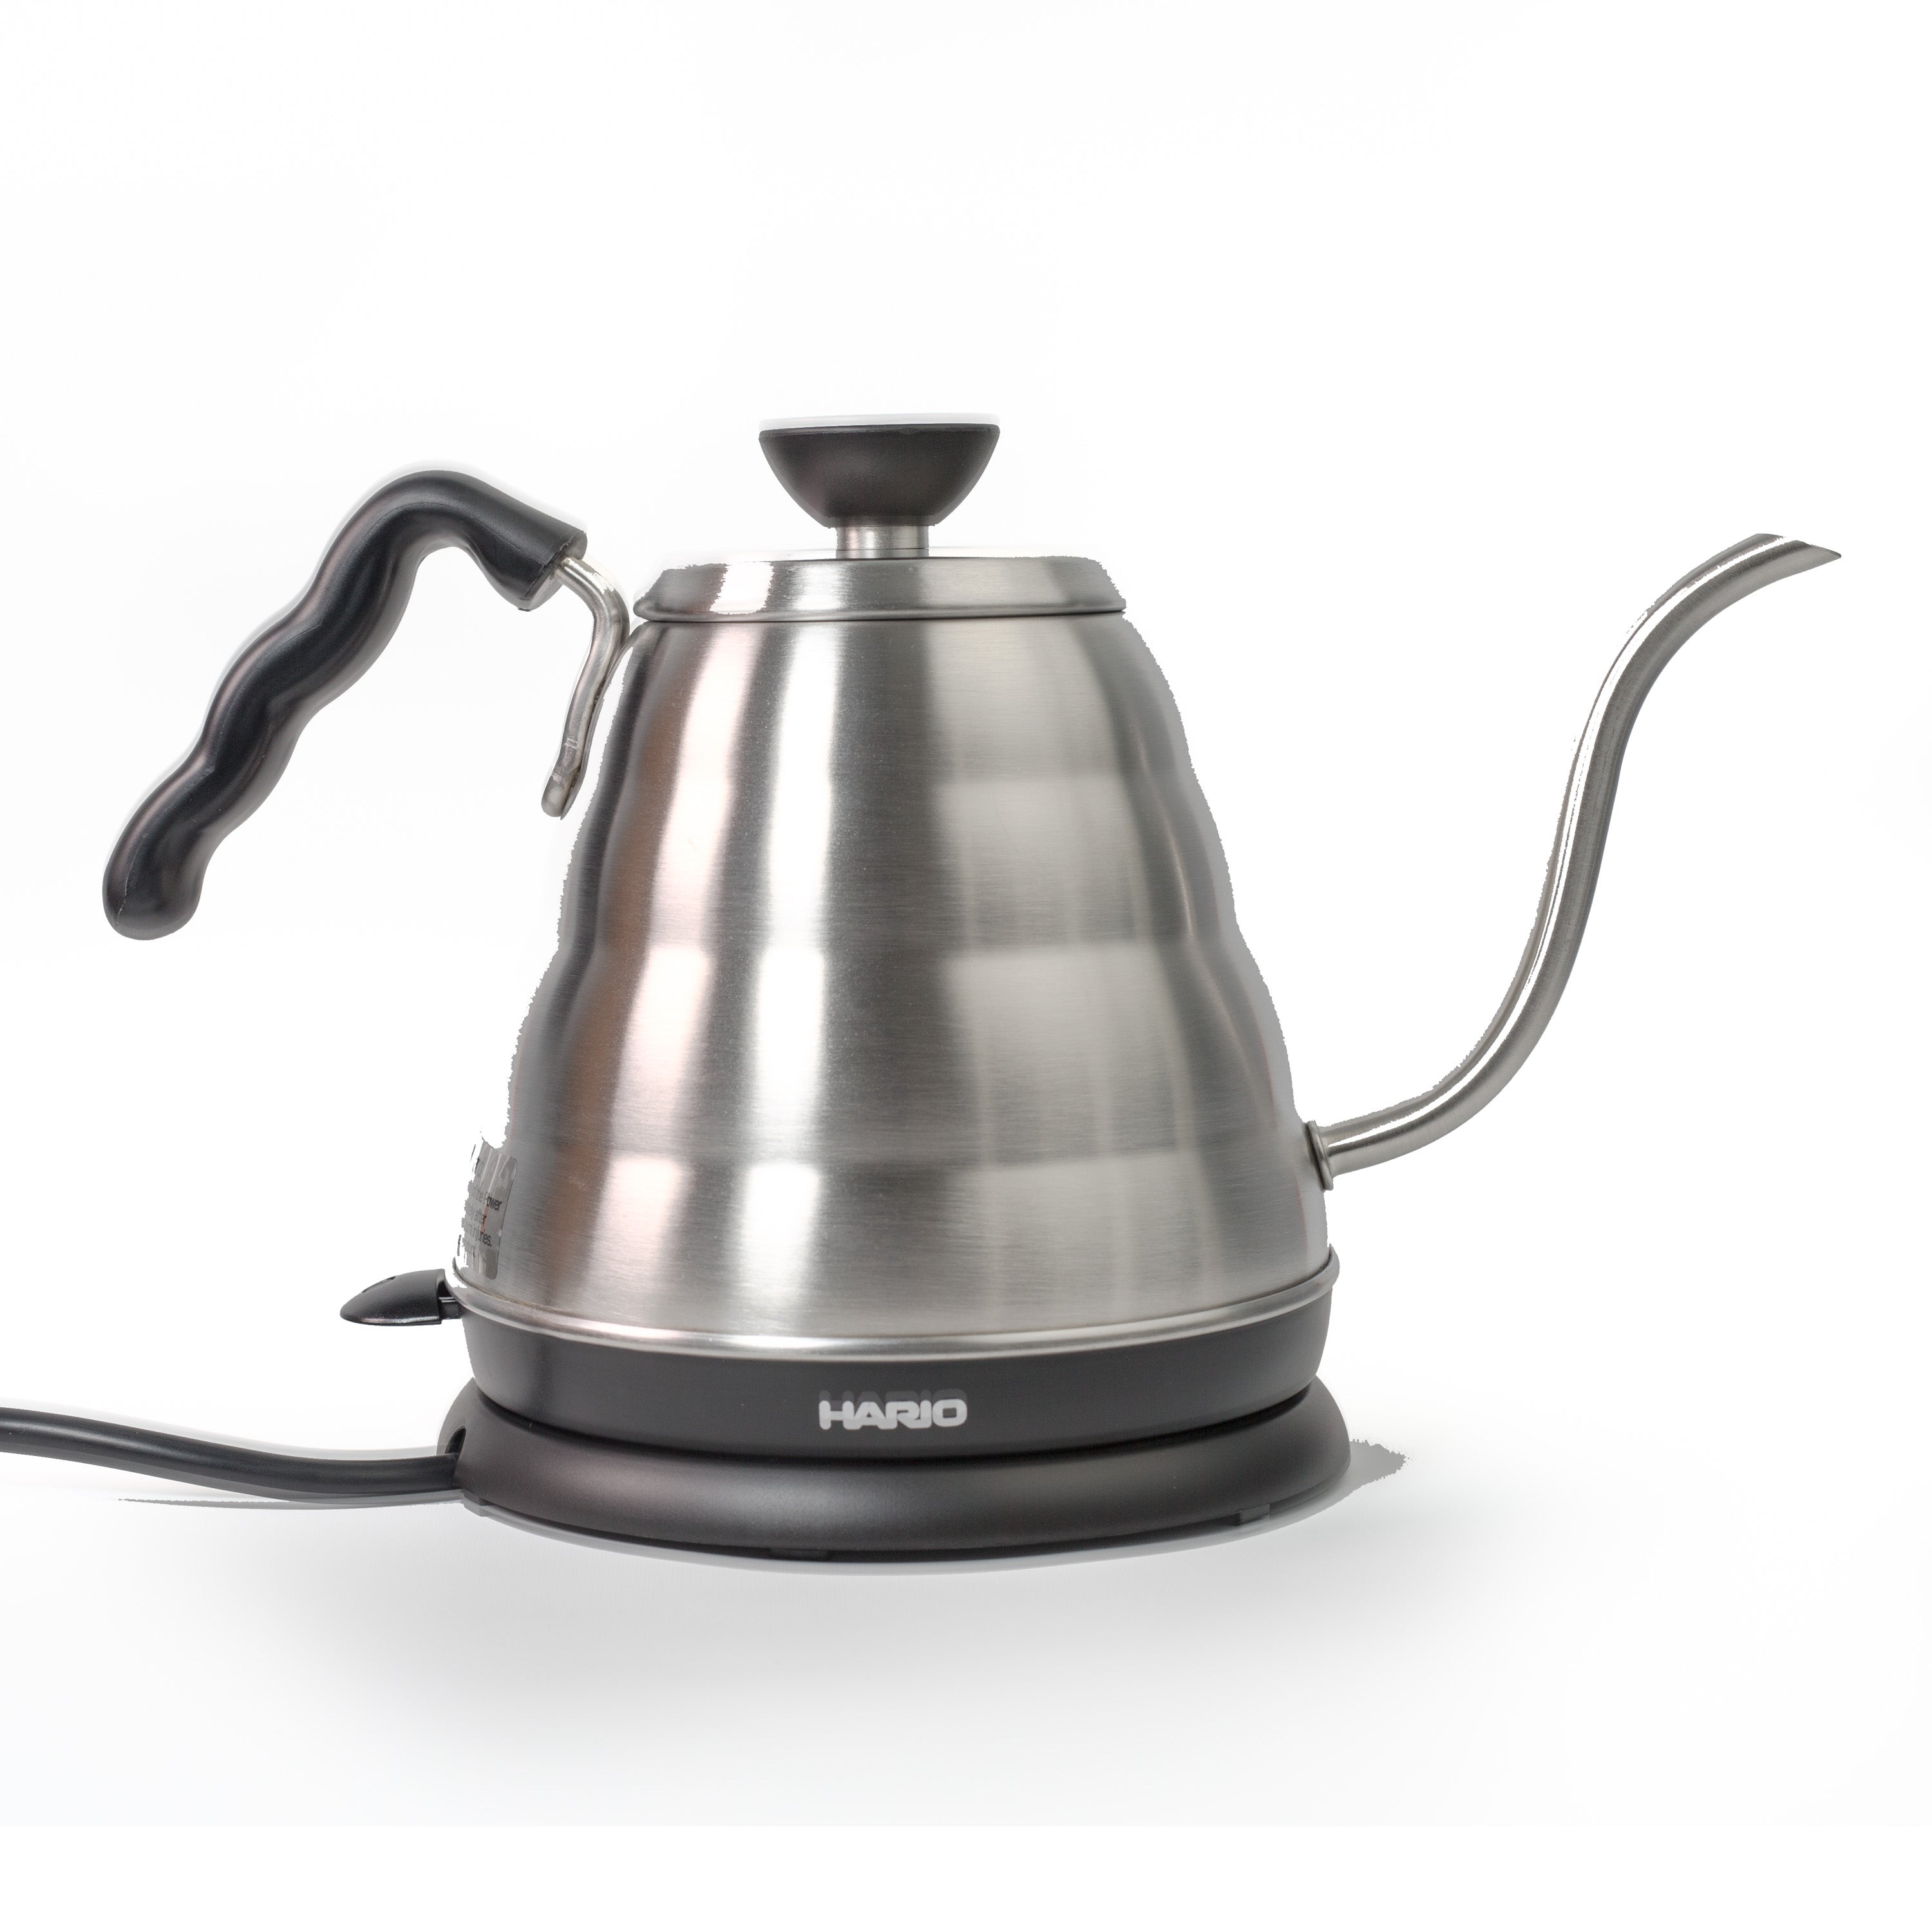 https://cdn.shopify.com/s/files/1/0567/7101/8910/products/kettle-hario-electric.jpg?v=1634747181